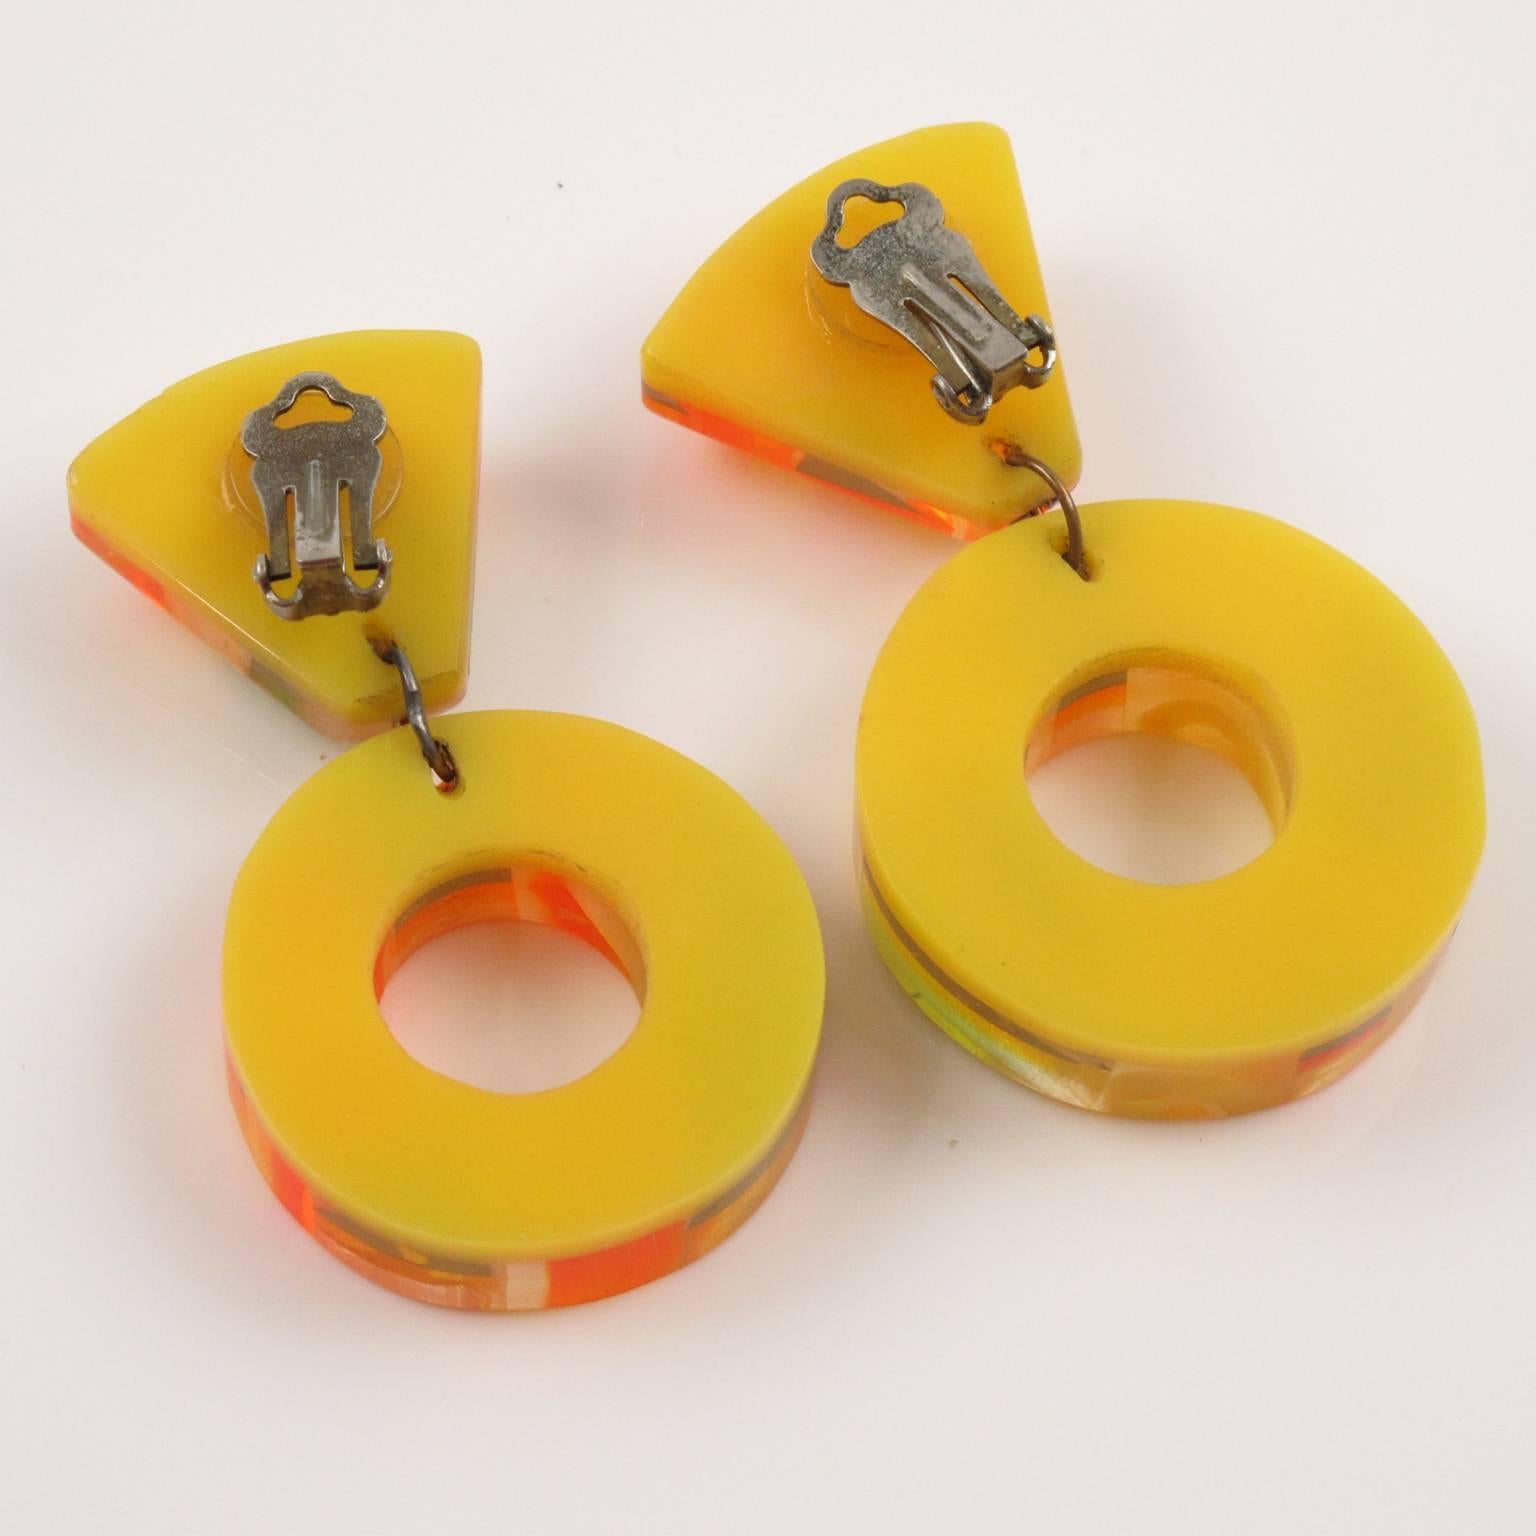 Dangle Loop Lucite Clip on Earrings by Harriet Bauknight for Kaso Sunny Colors 1